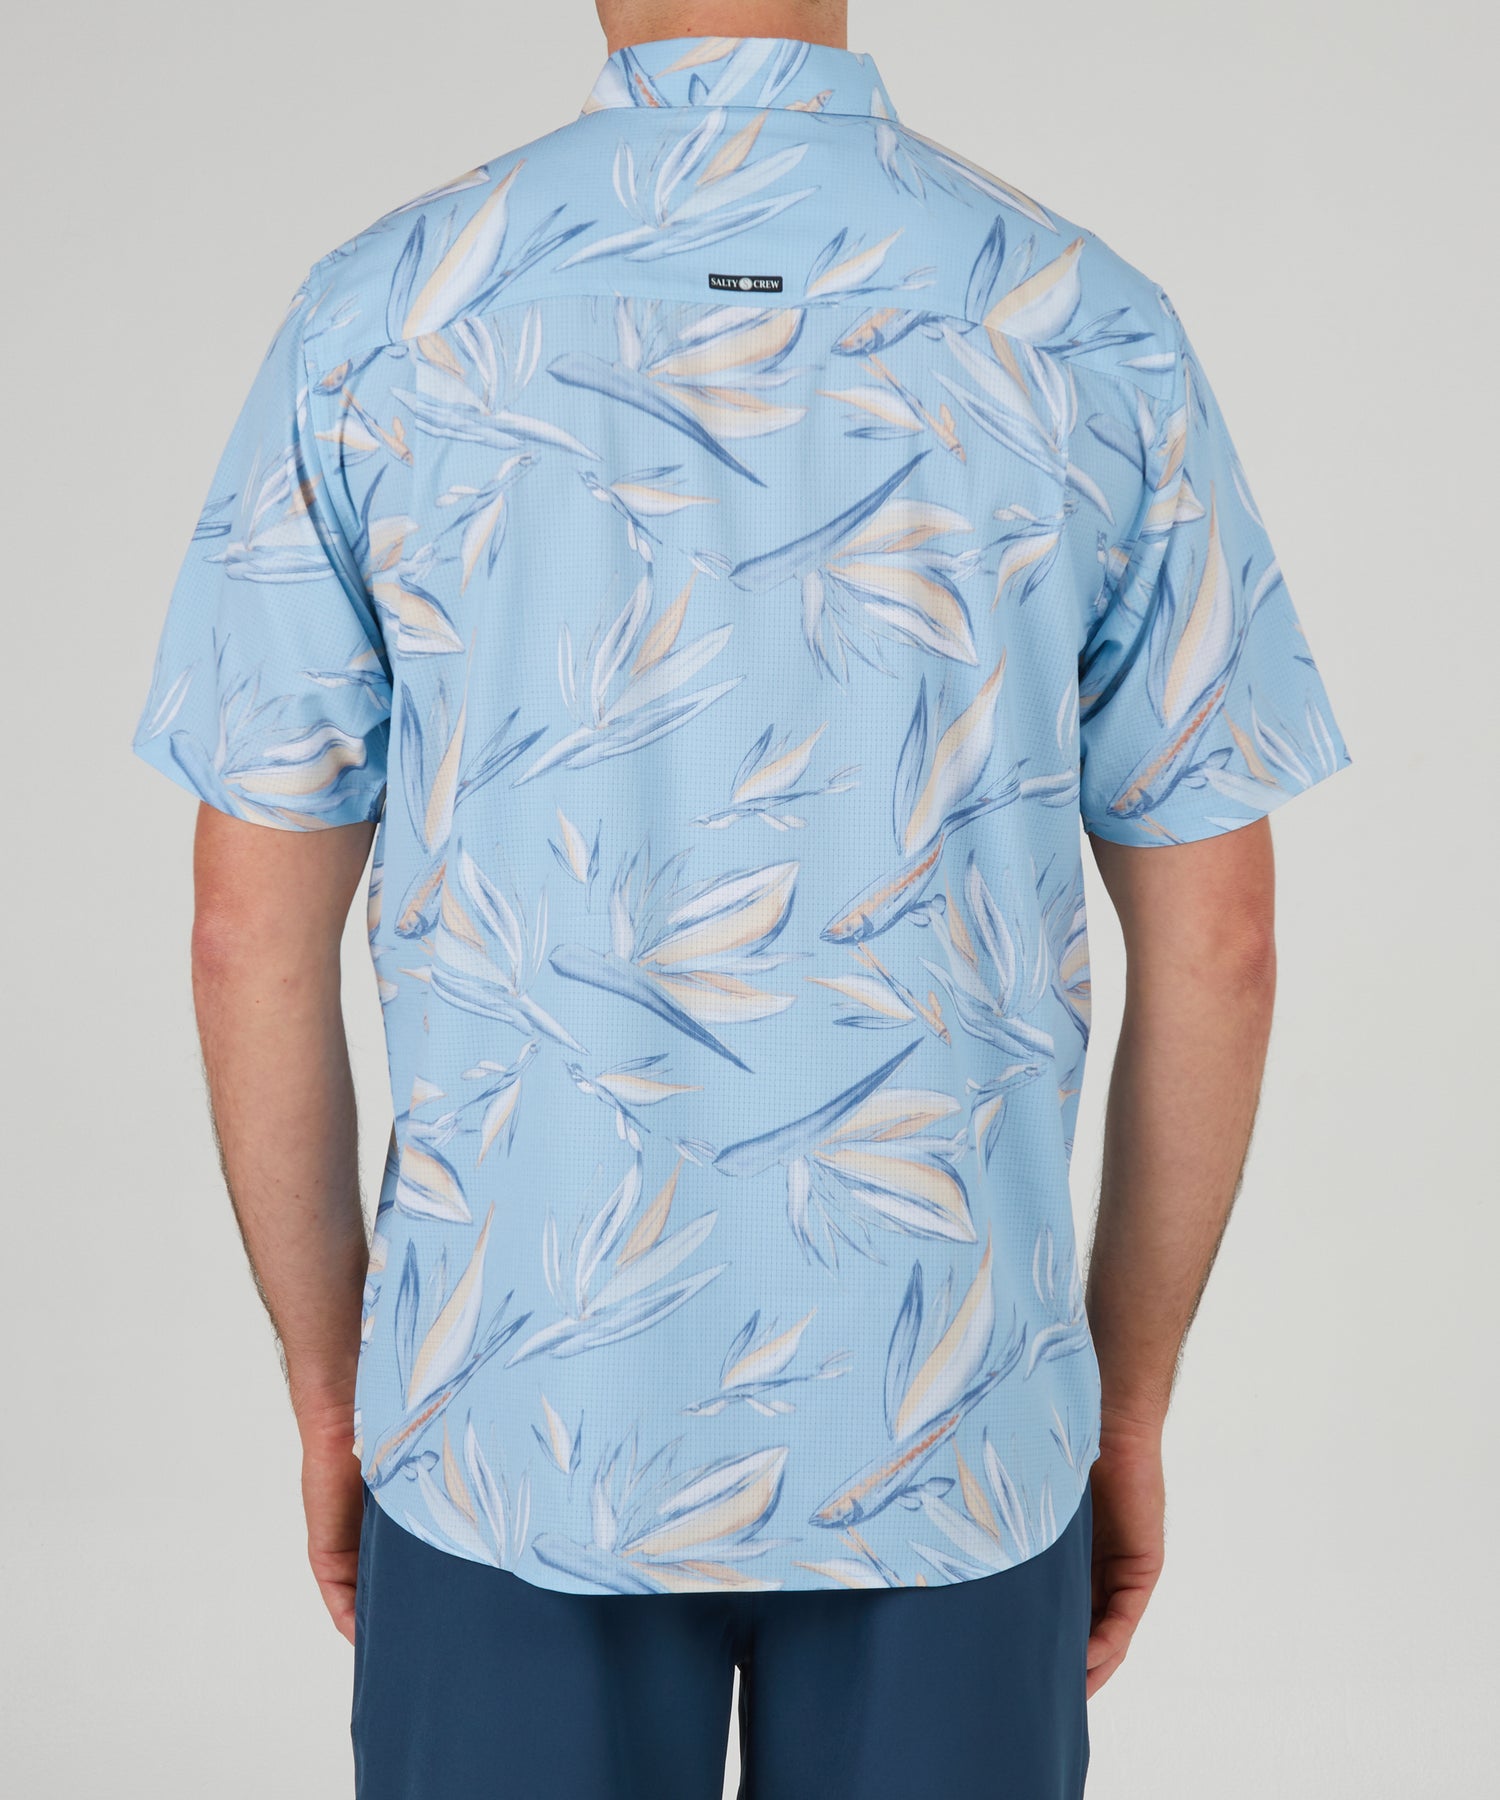 back view of Floral Flyer Blue S/S Tech Woven